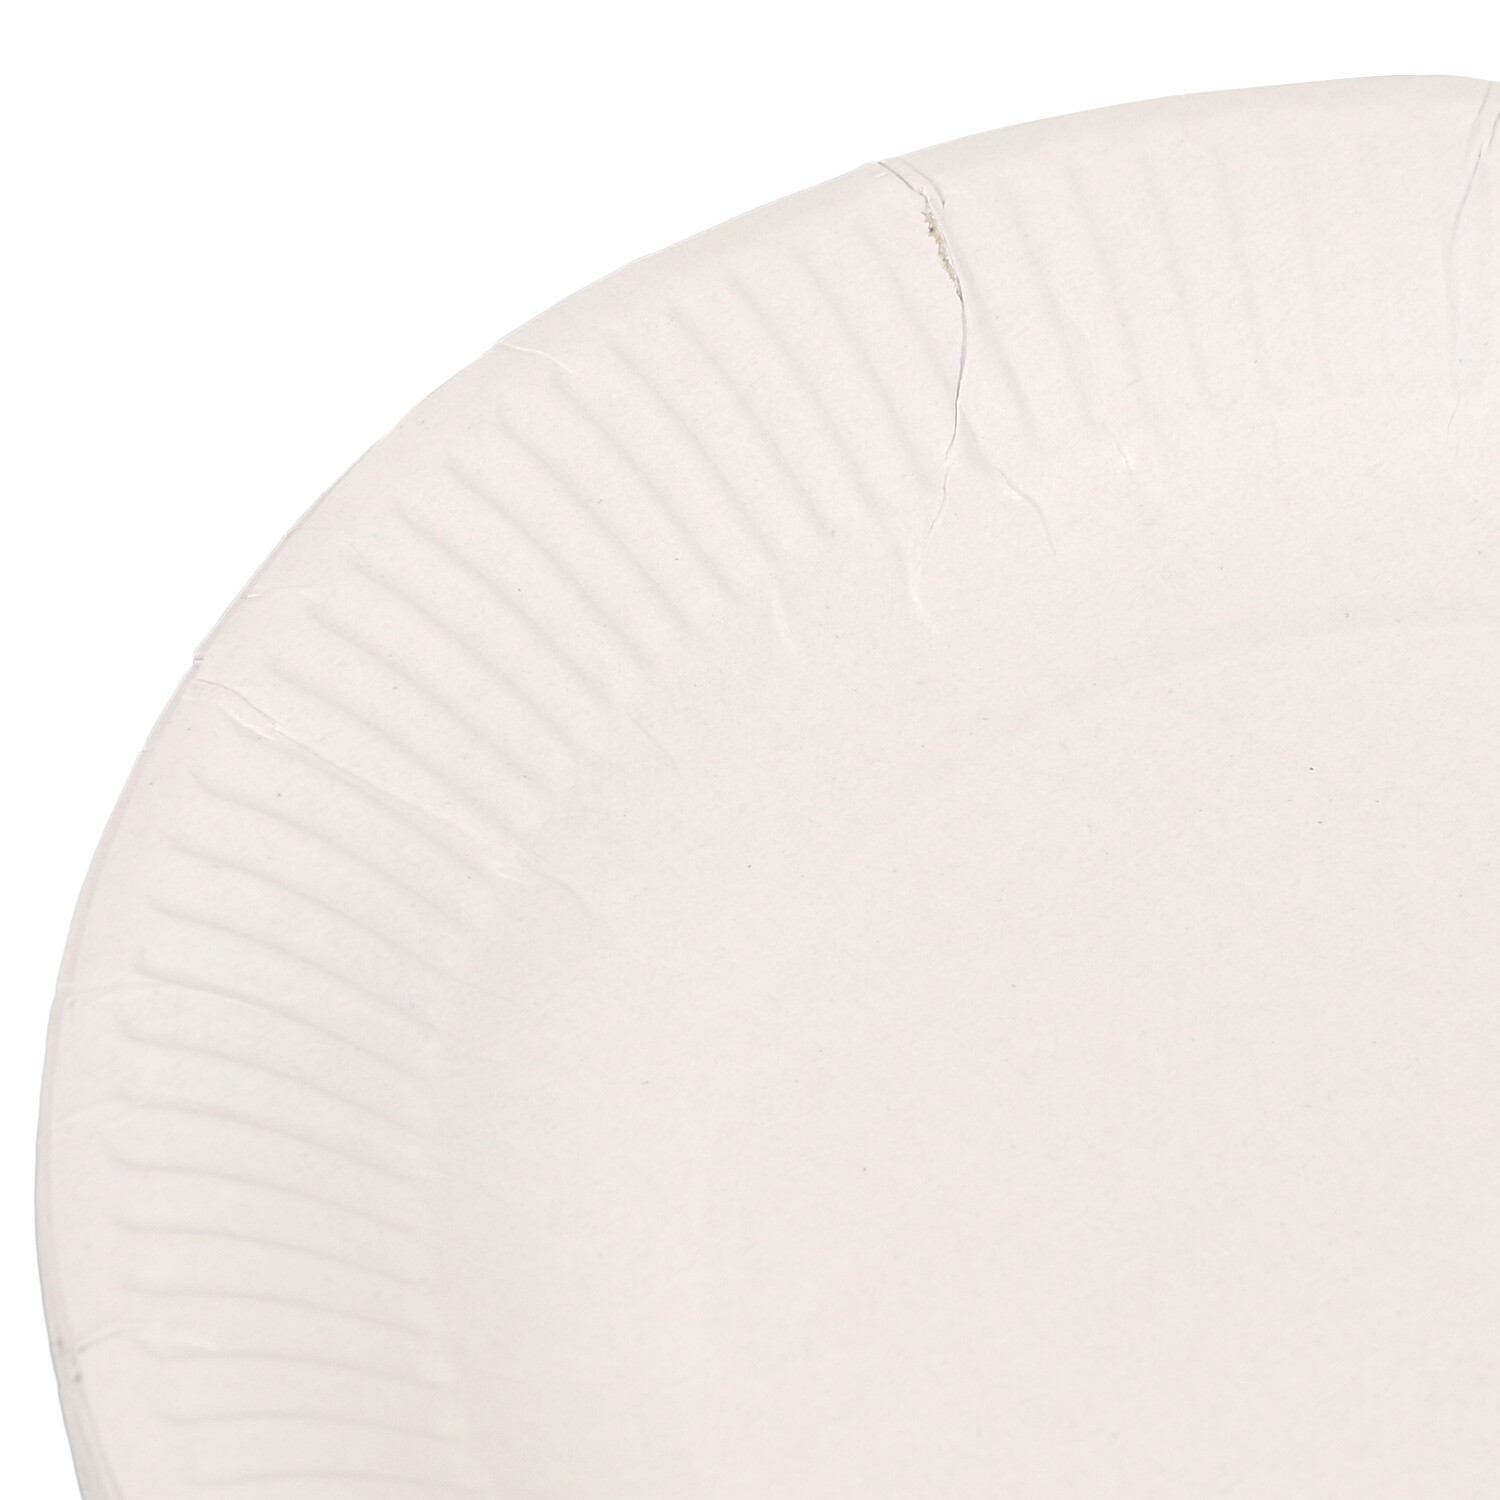 Pack of MyHome Paper Plates - White Image 3